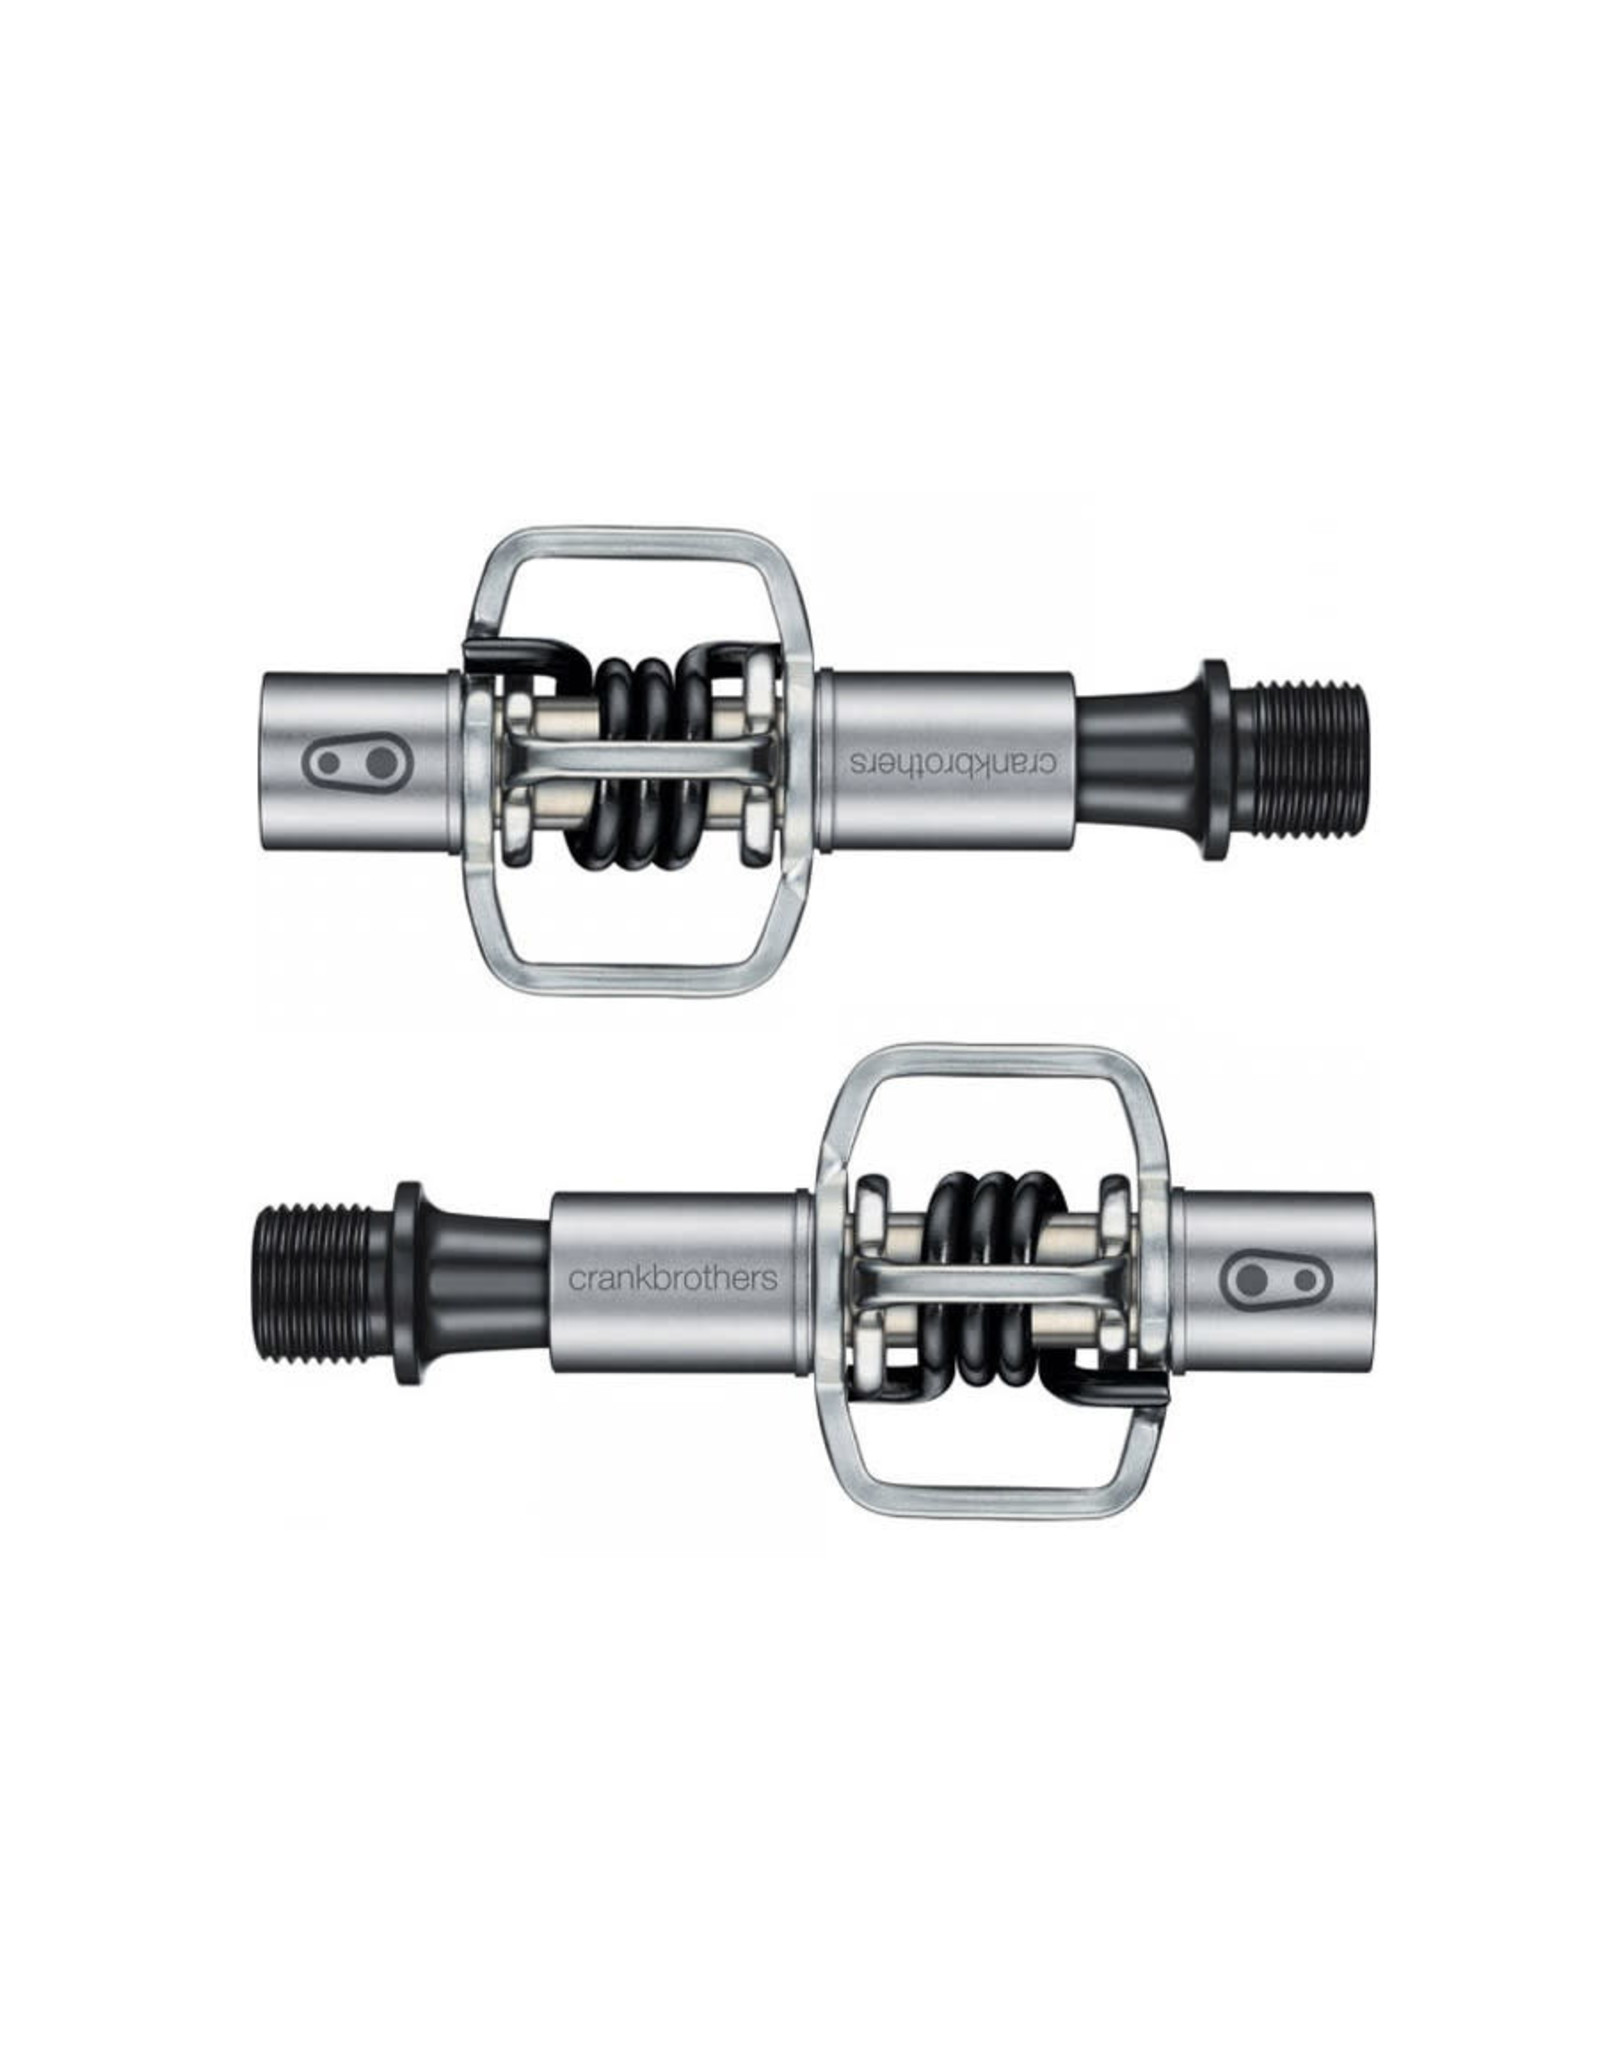 CRANK BROTHERS CRANK BROTHERS EGGBEATER 1